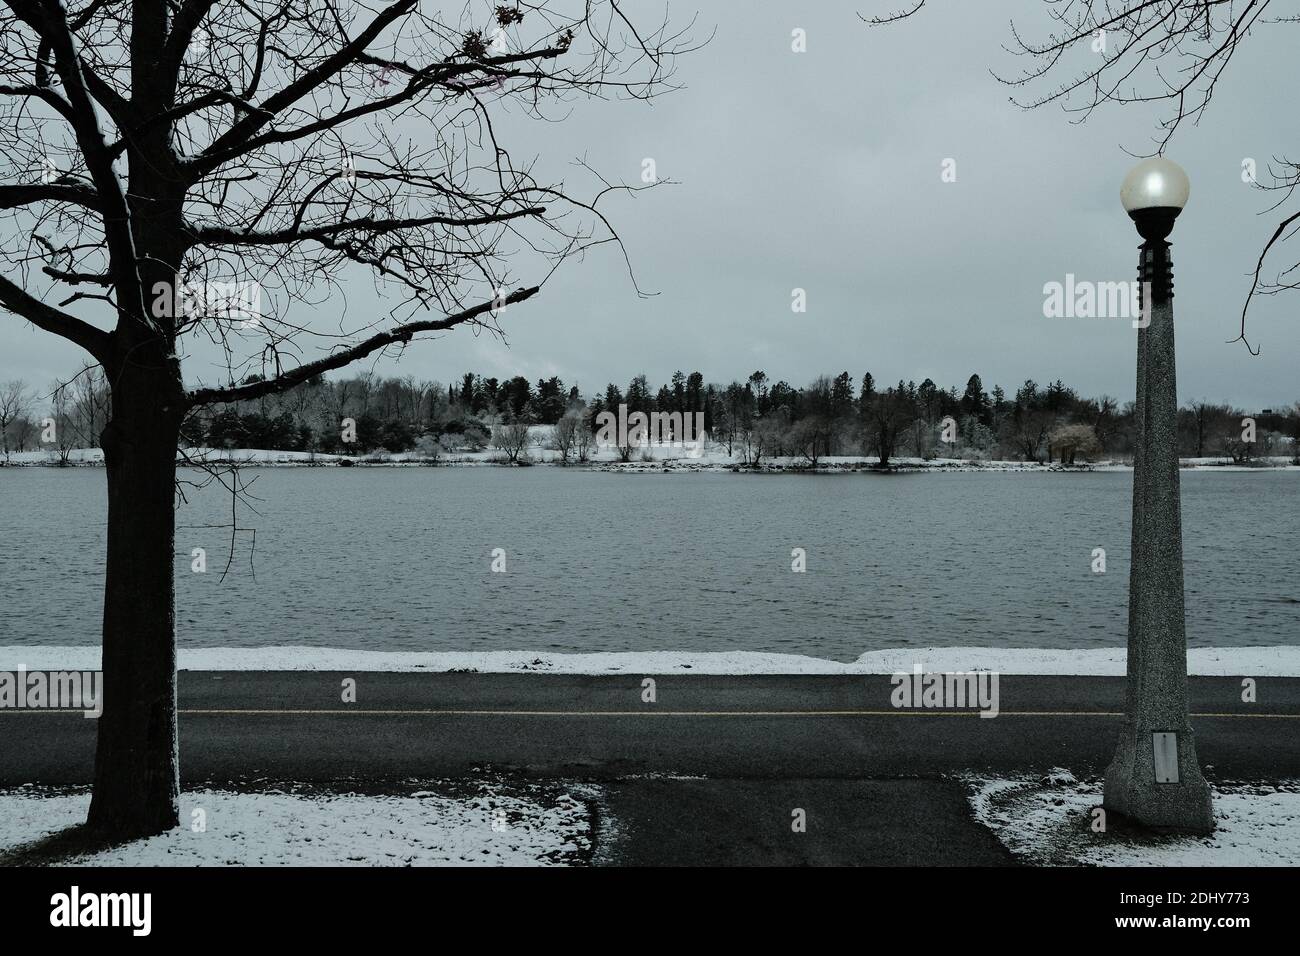 A chilly and overcast winter scene at Dow's Lake, Ottawa, Ontario, Canada. Stock Photo